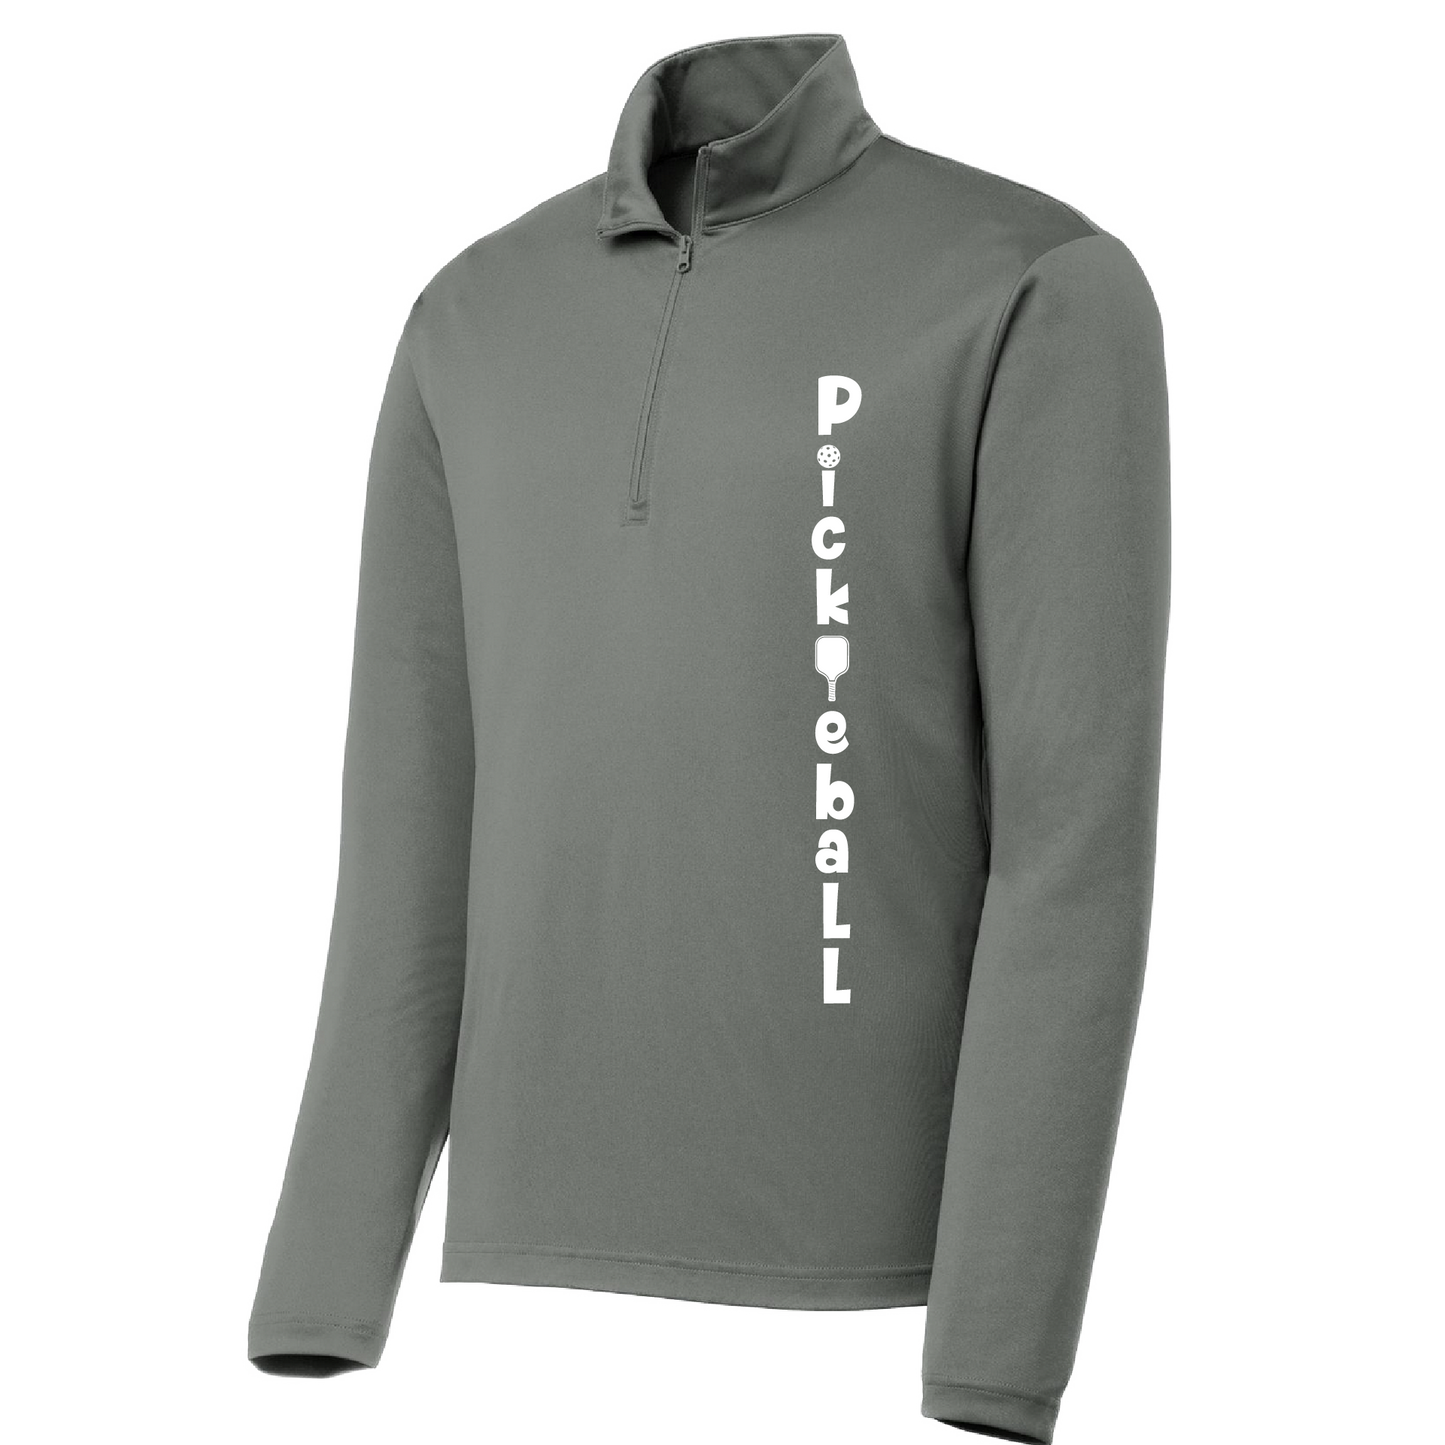 Pickleball Design: Pickleball (Vertical) Customizable Location  Men's 1/4-Zip Pullover  Turn up the volume in this Men's shirt with its perfect mix of softness and attitude. Material is ultra-comfortable with moisture wicking properties and tri-blend softness. PosiCharge technology locks in color. Highly breathable and lightweight. Versatile enough for wearing year-round.